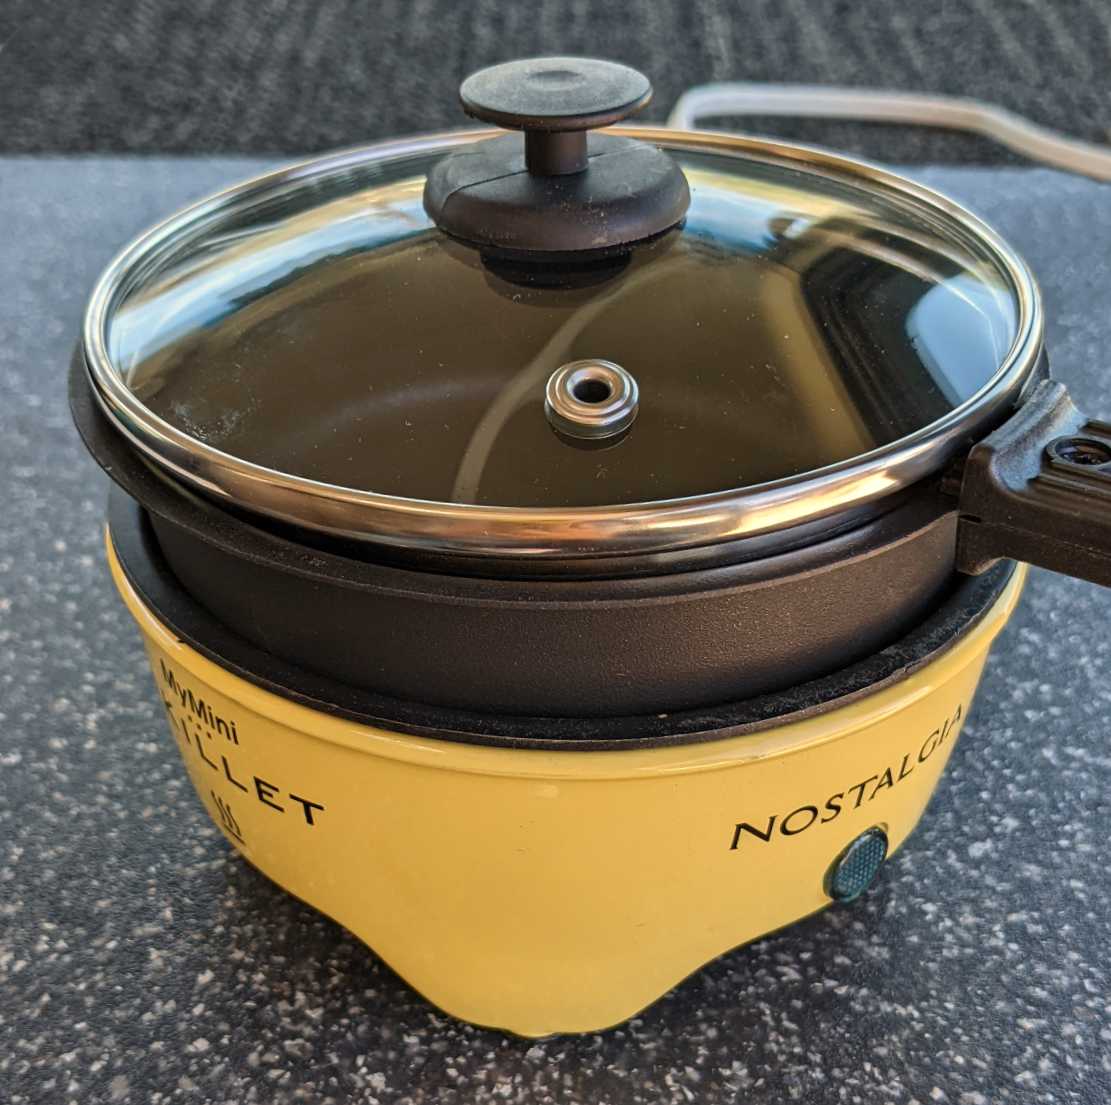 A Low-Power Multifunction Electric Mini Cooker for Nomads - Cheap RV Living